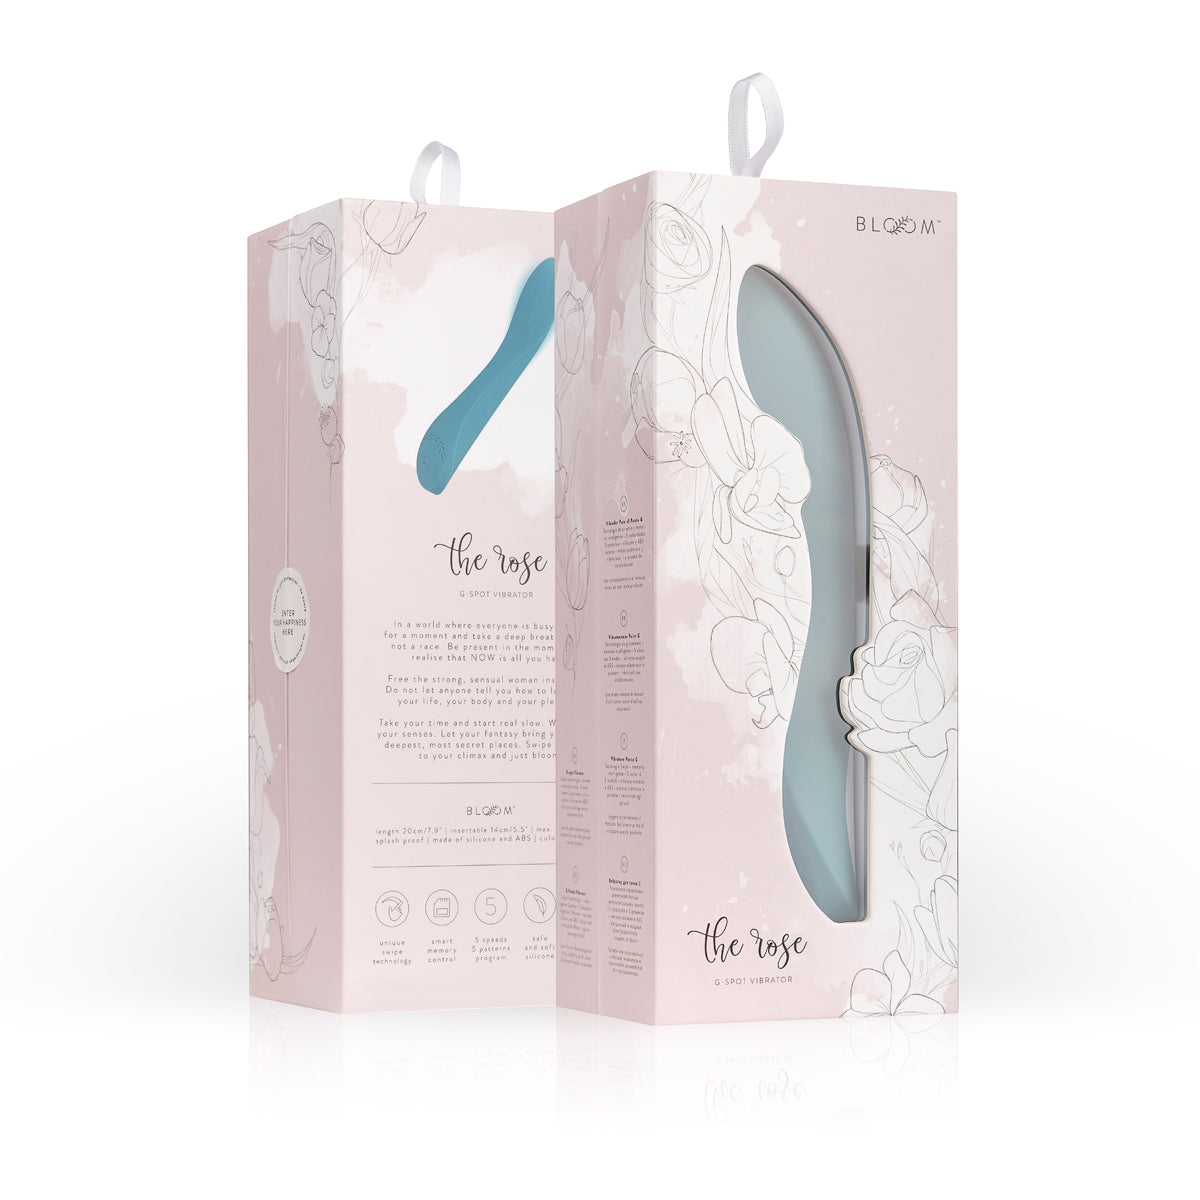 The Rechargeable Rose G-Spot Vibrator